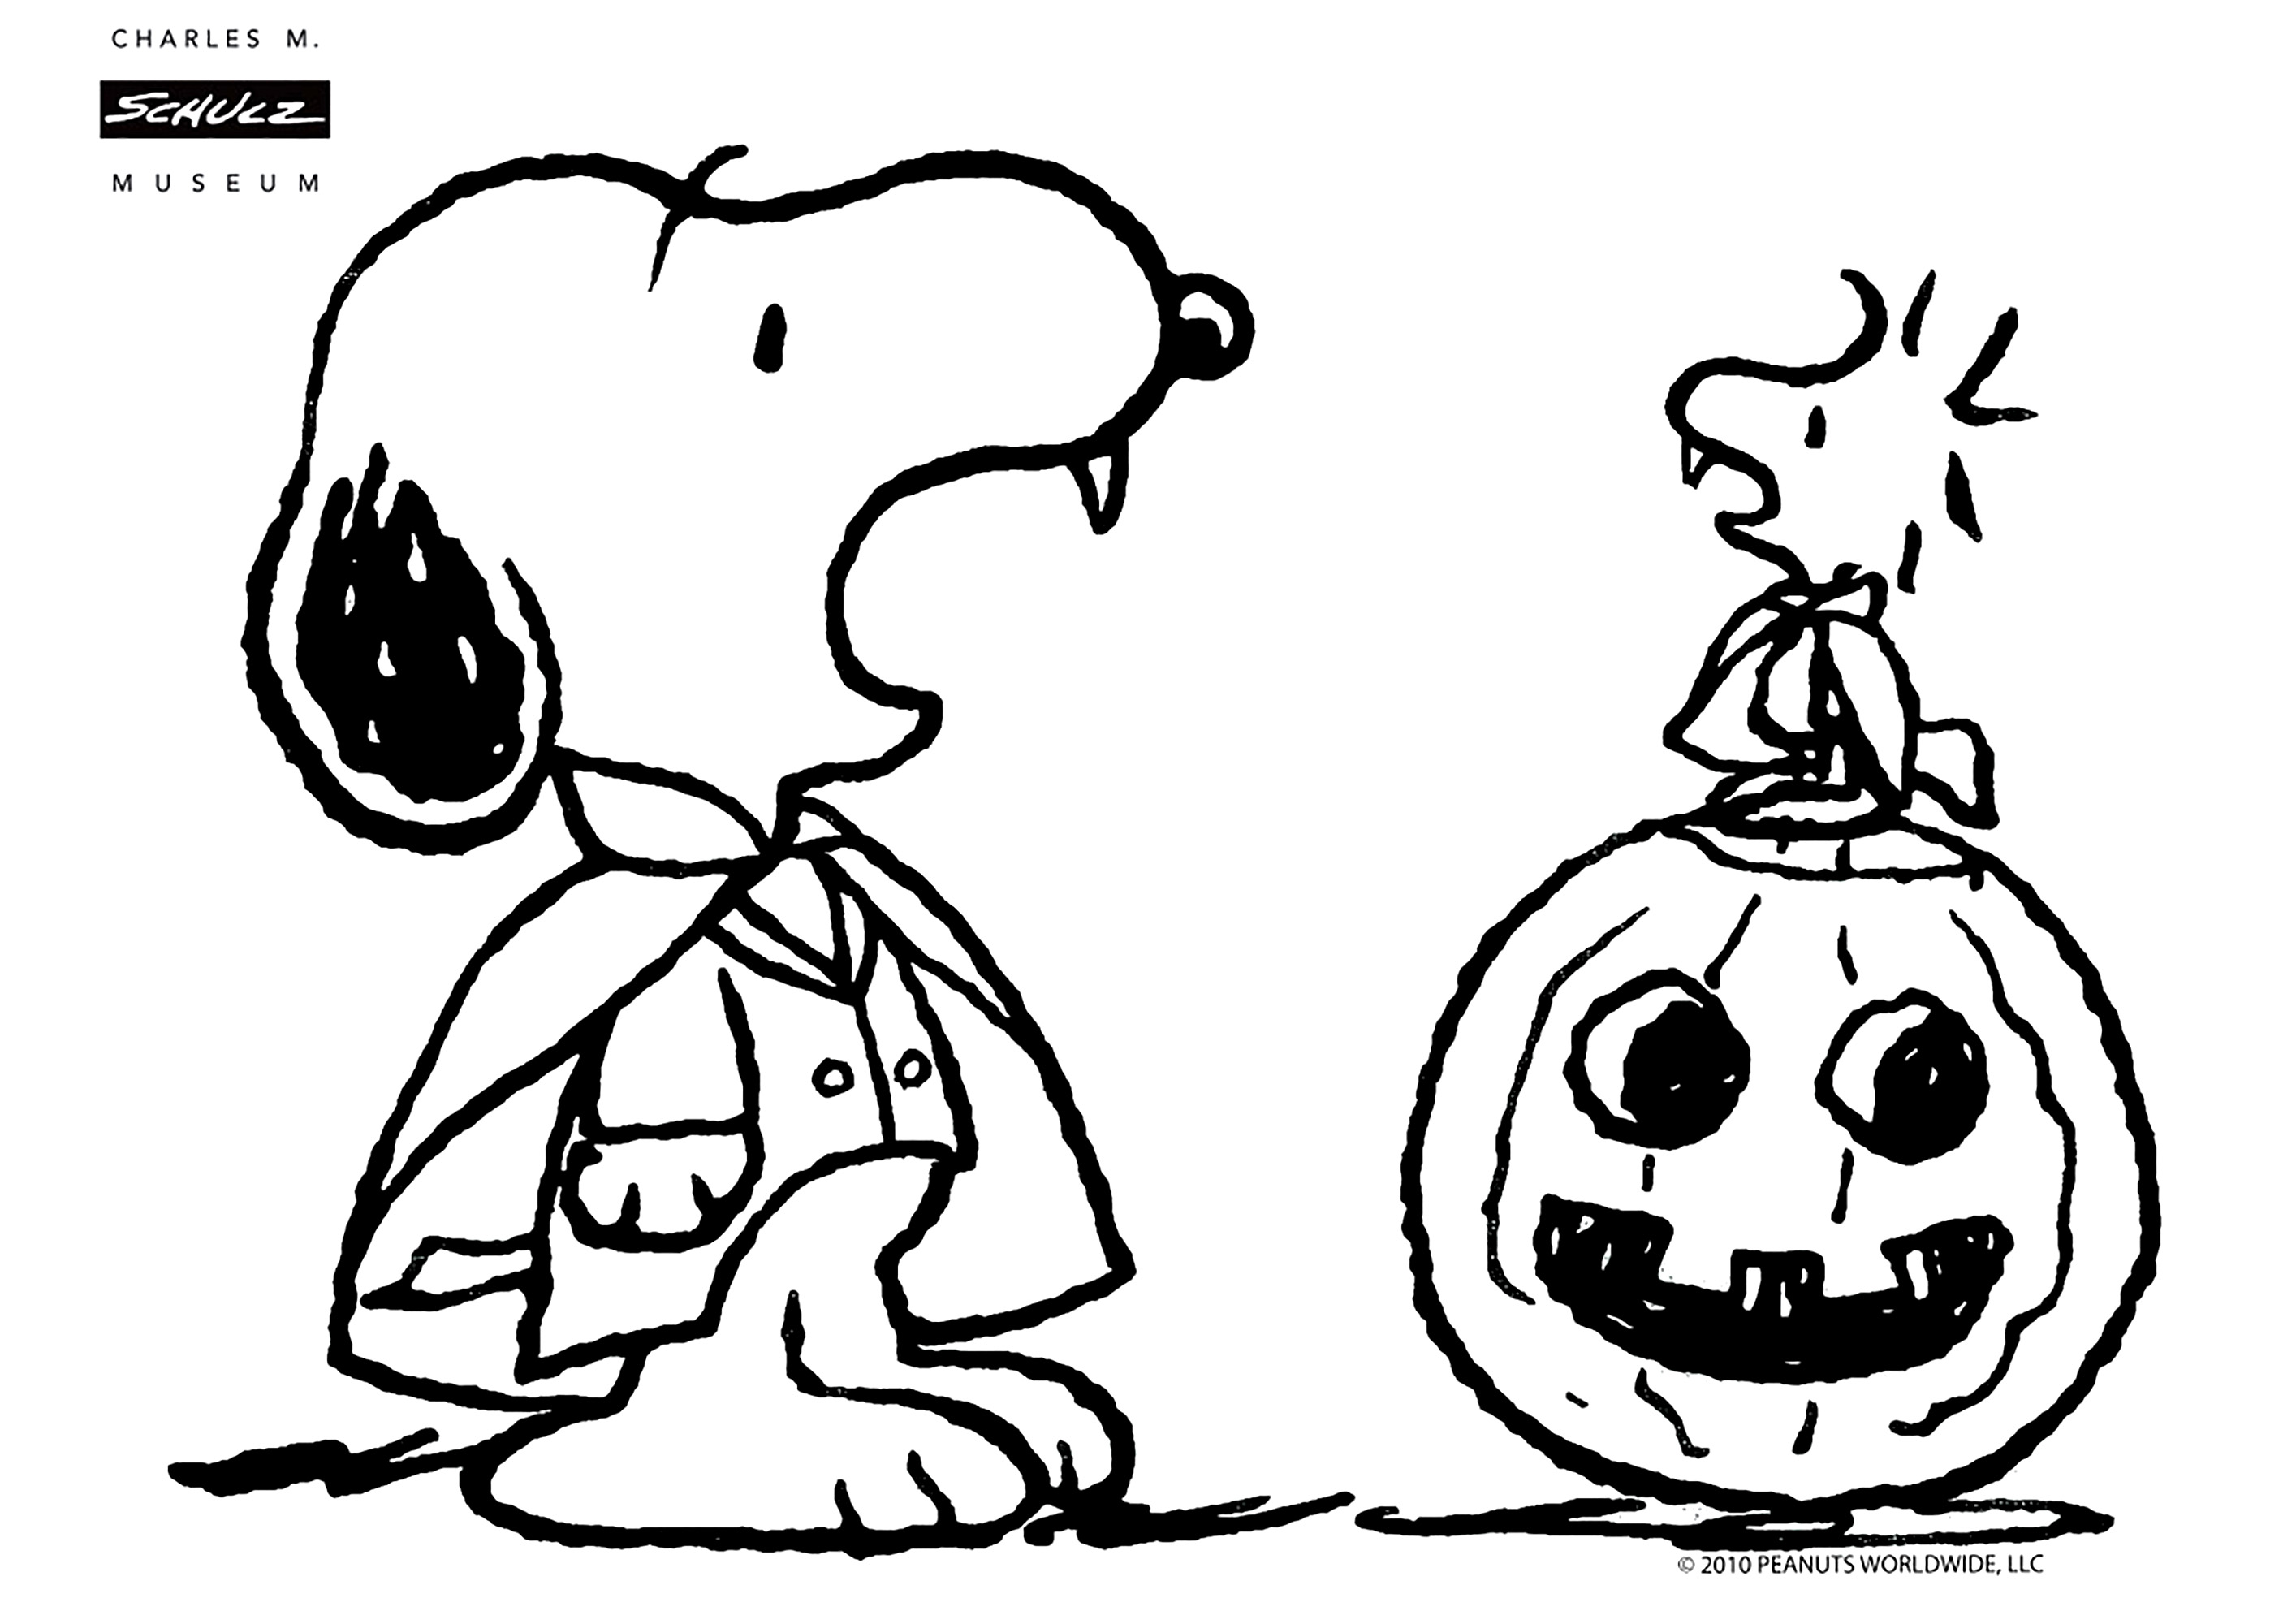 Snoopy dressed as a vampire, with his friend Woodstock on a pumpkin